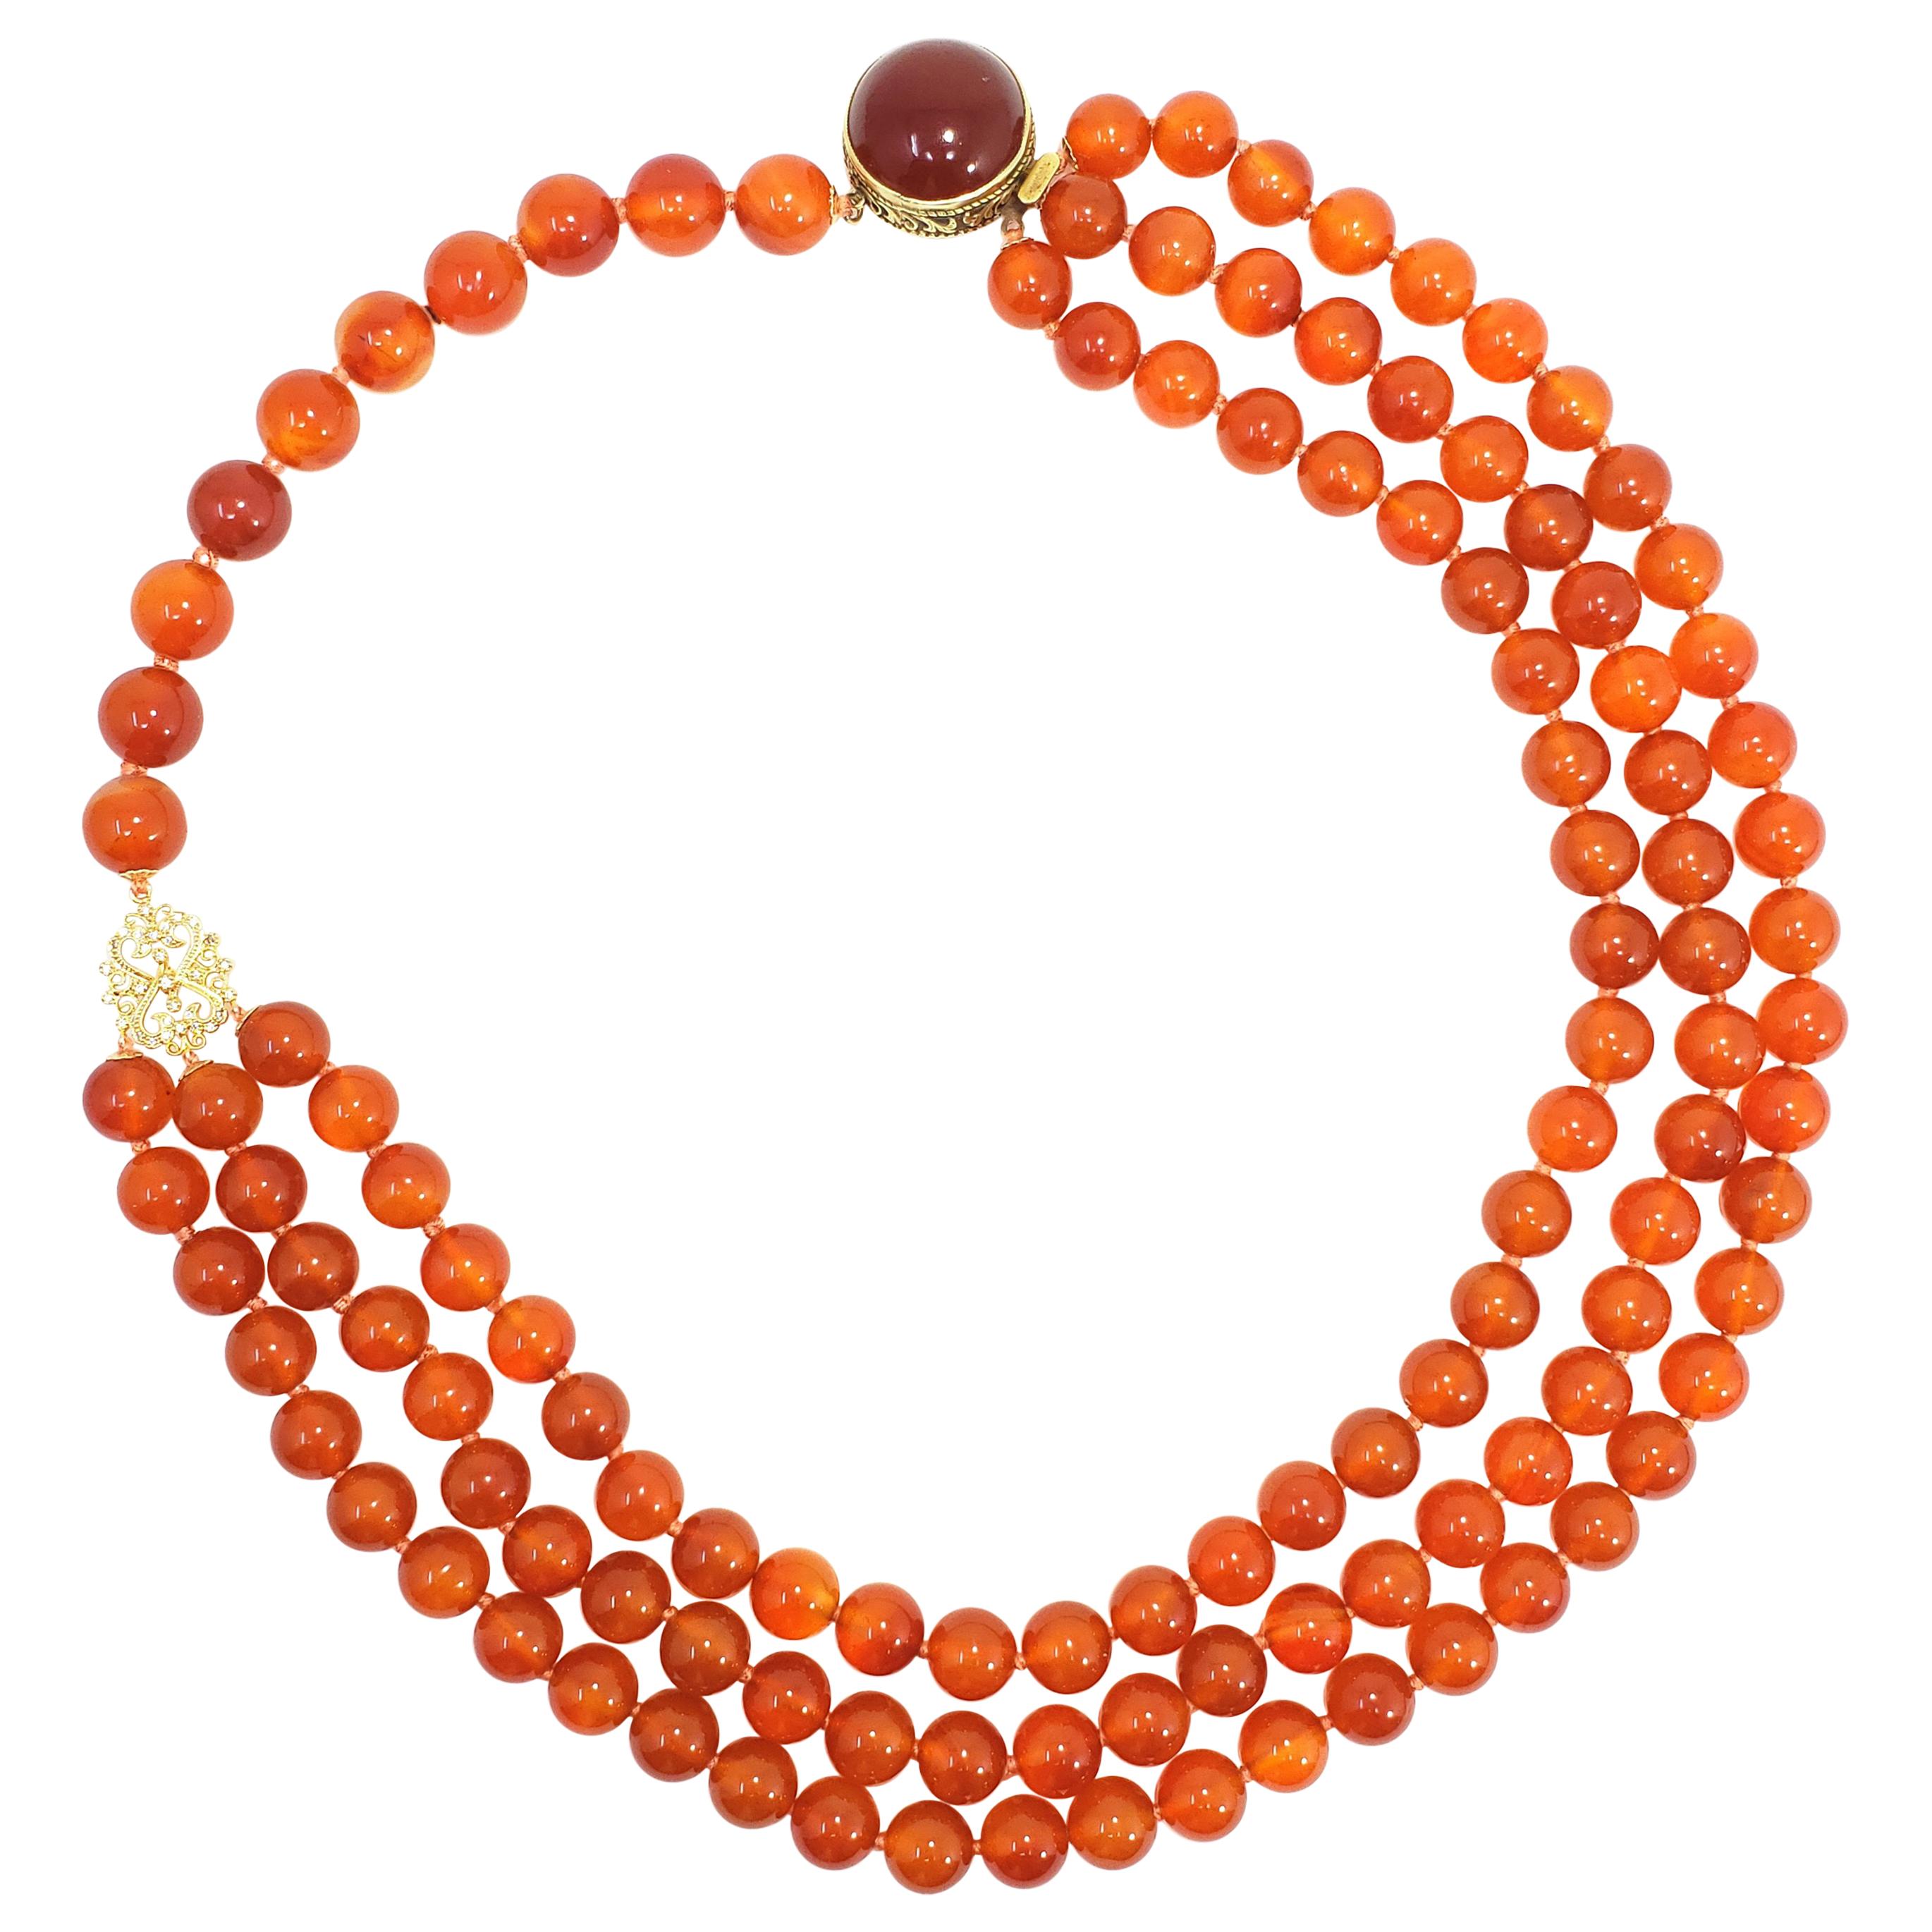 Carnelian Bead Knotted String Triple Strand Necklace, 14 Karat Clasp For Sale